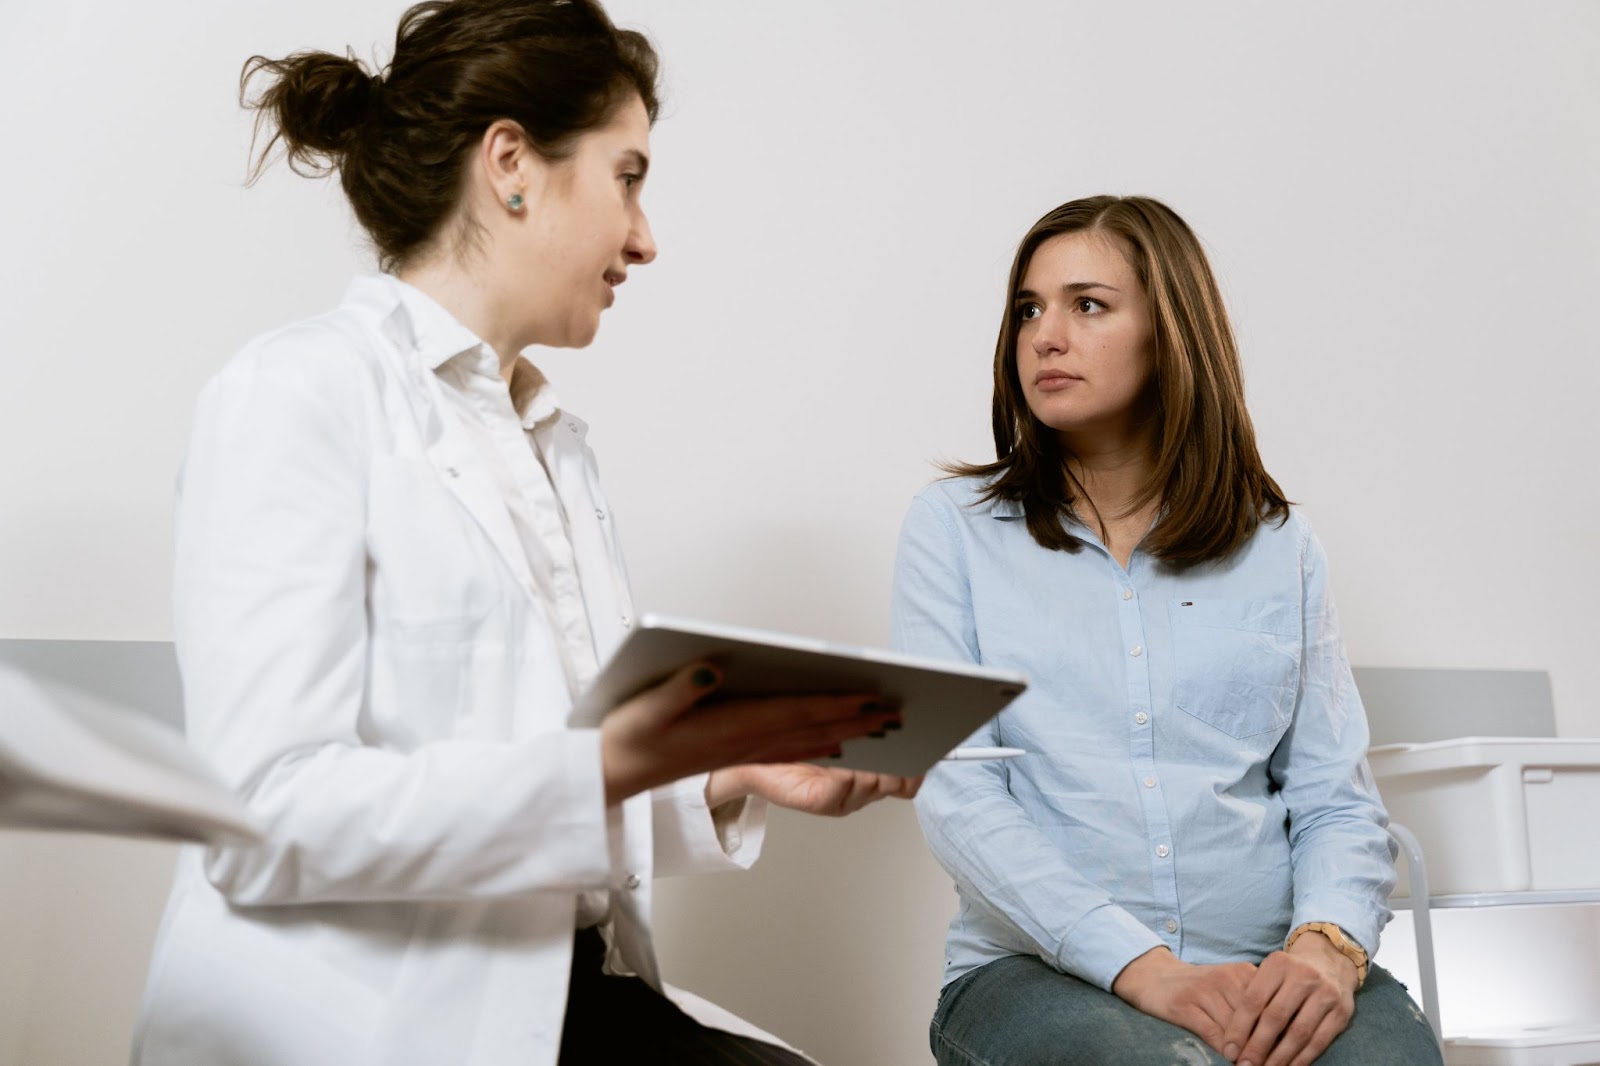 Healthcare office manager interacts with patient.